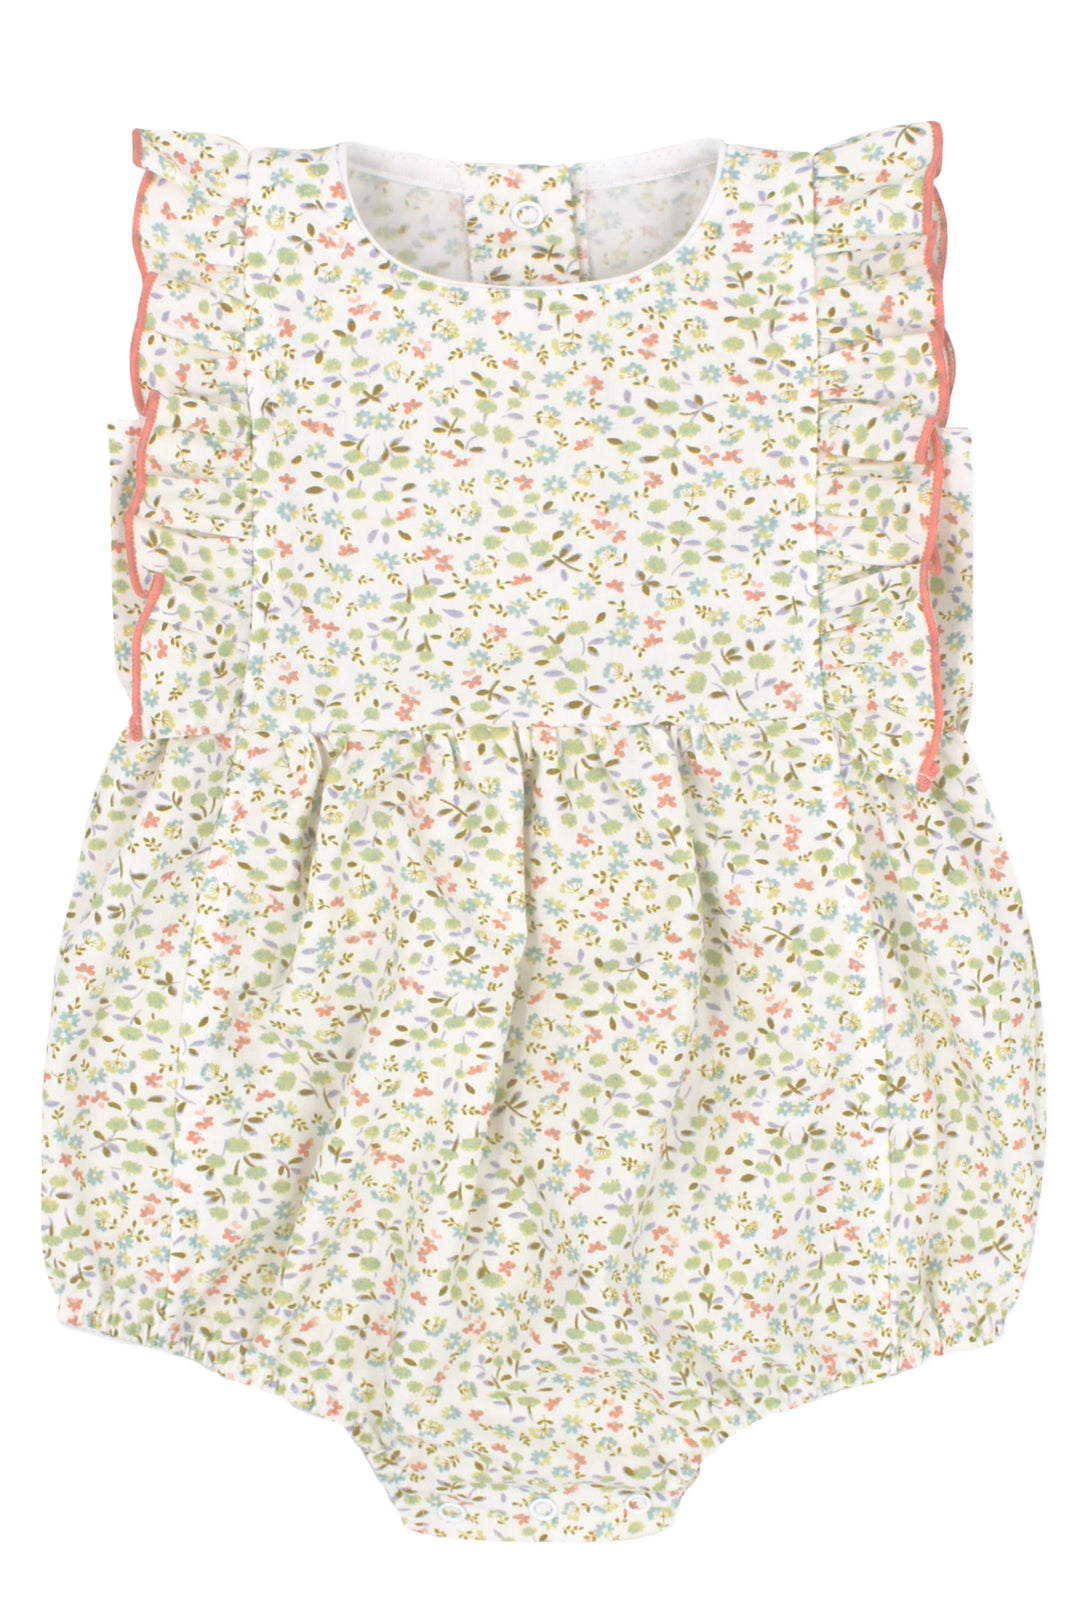 Rapife PREORDER "Mariana" Sage Green Floral Romper | Millie and John